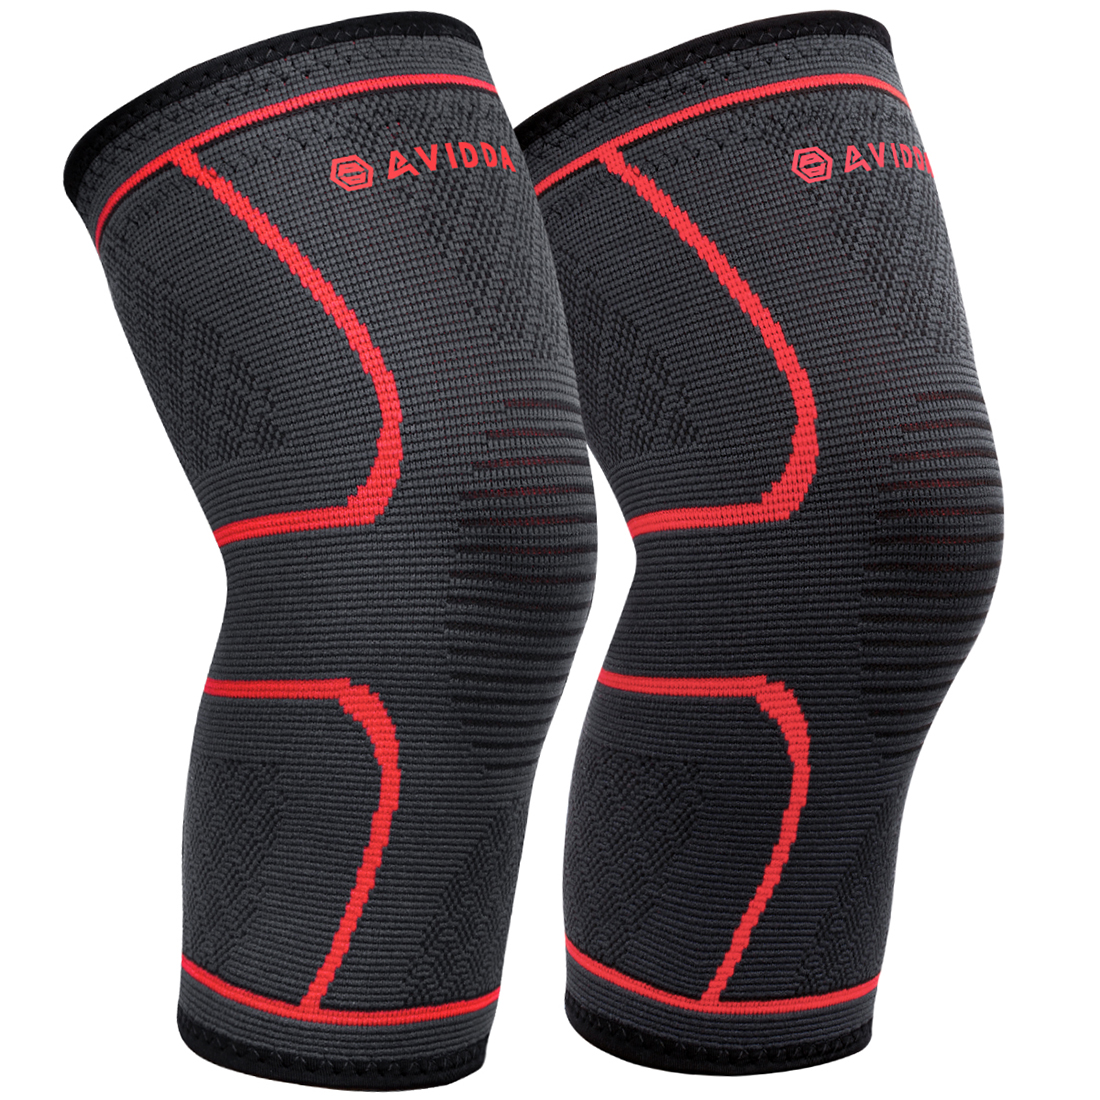 ACL Knee Braces & Ligament Supports